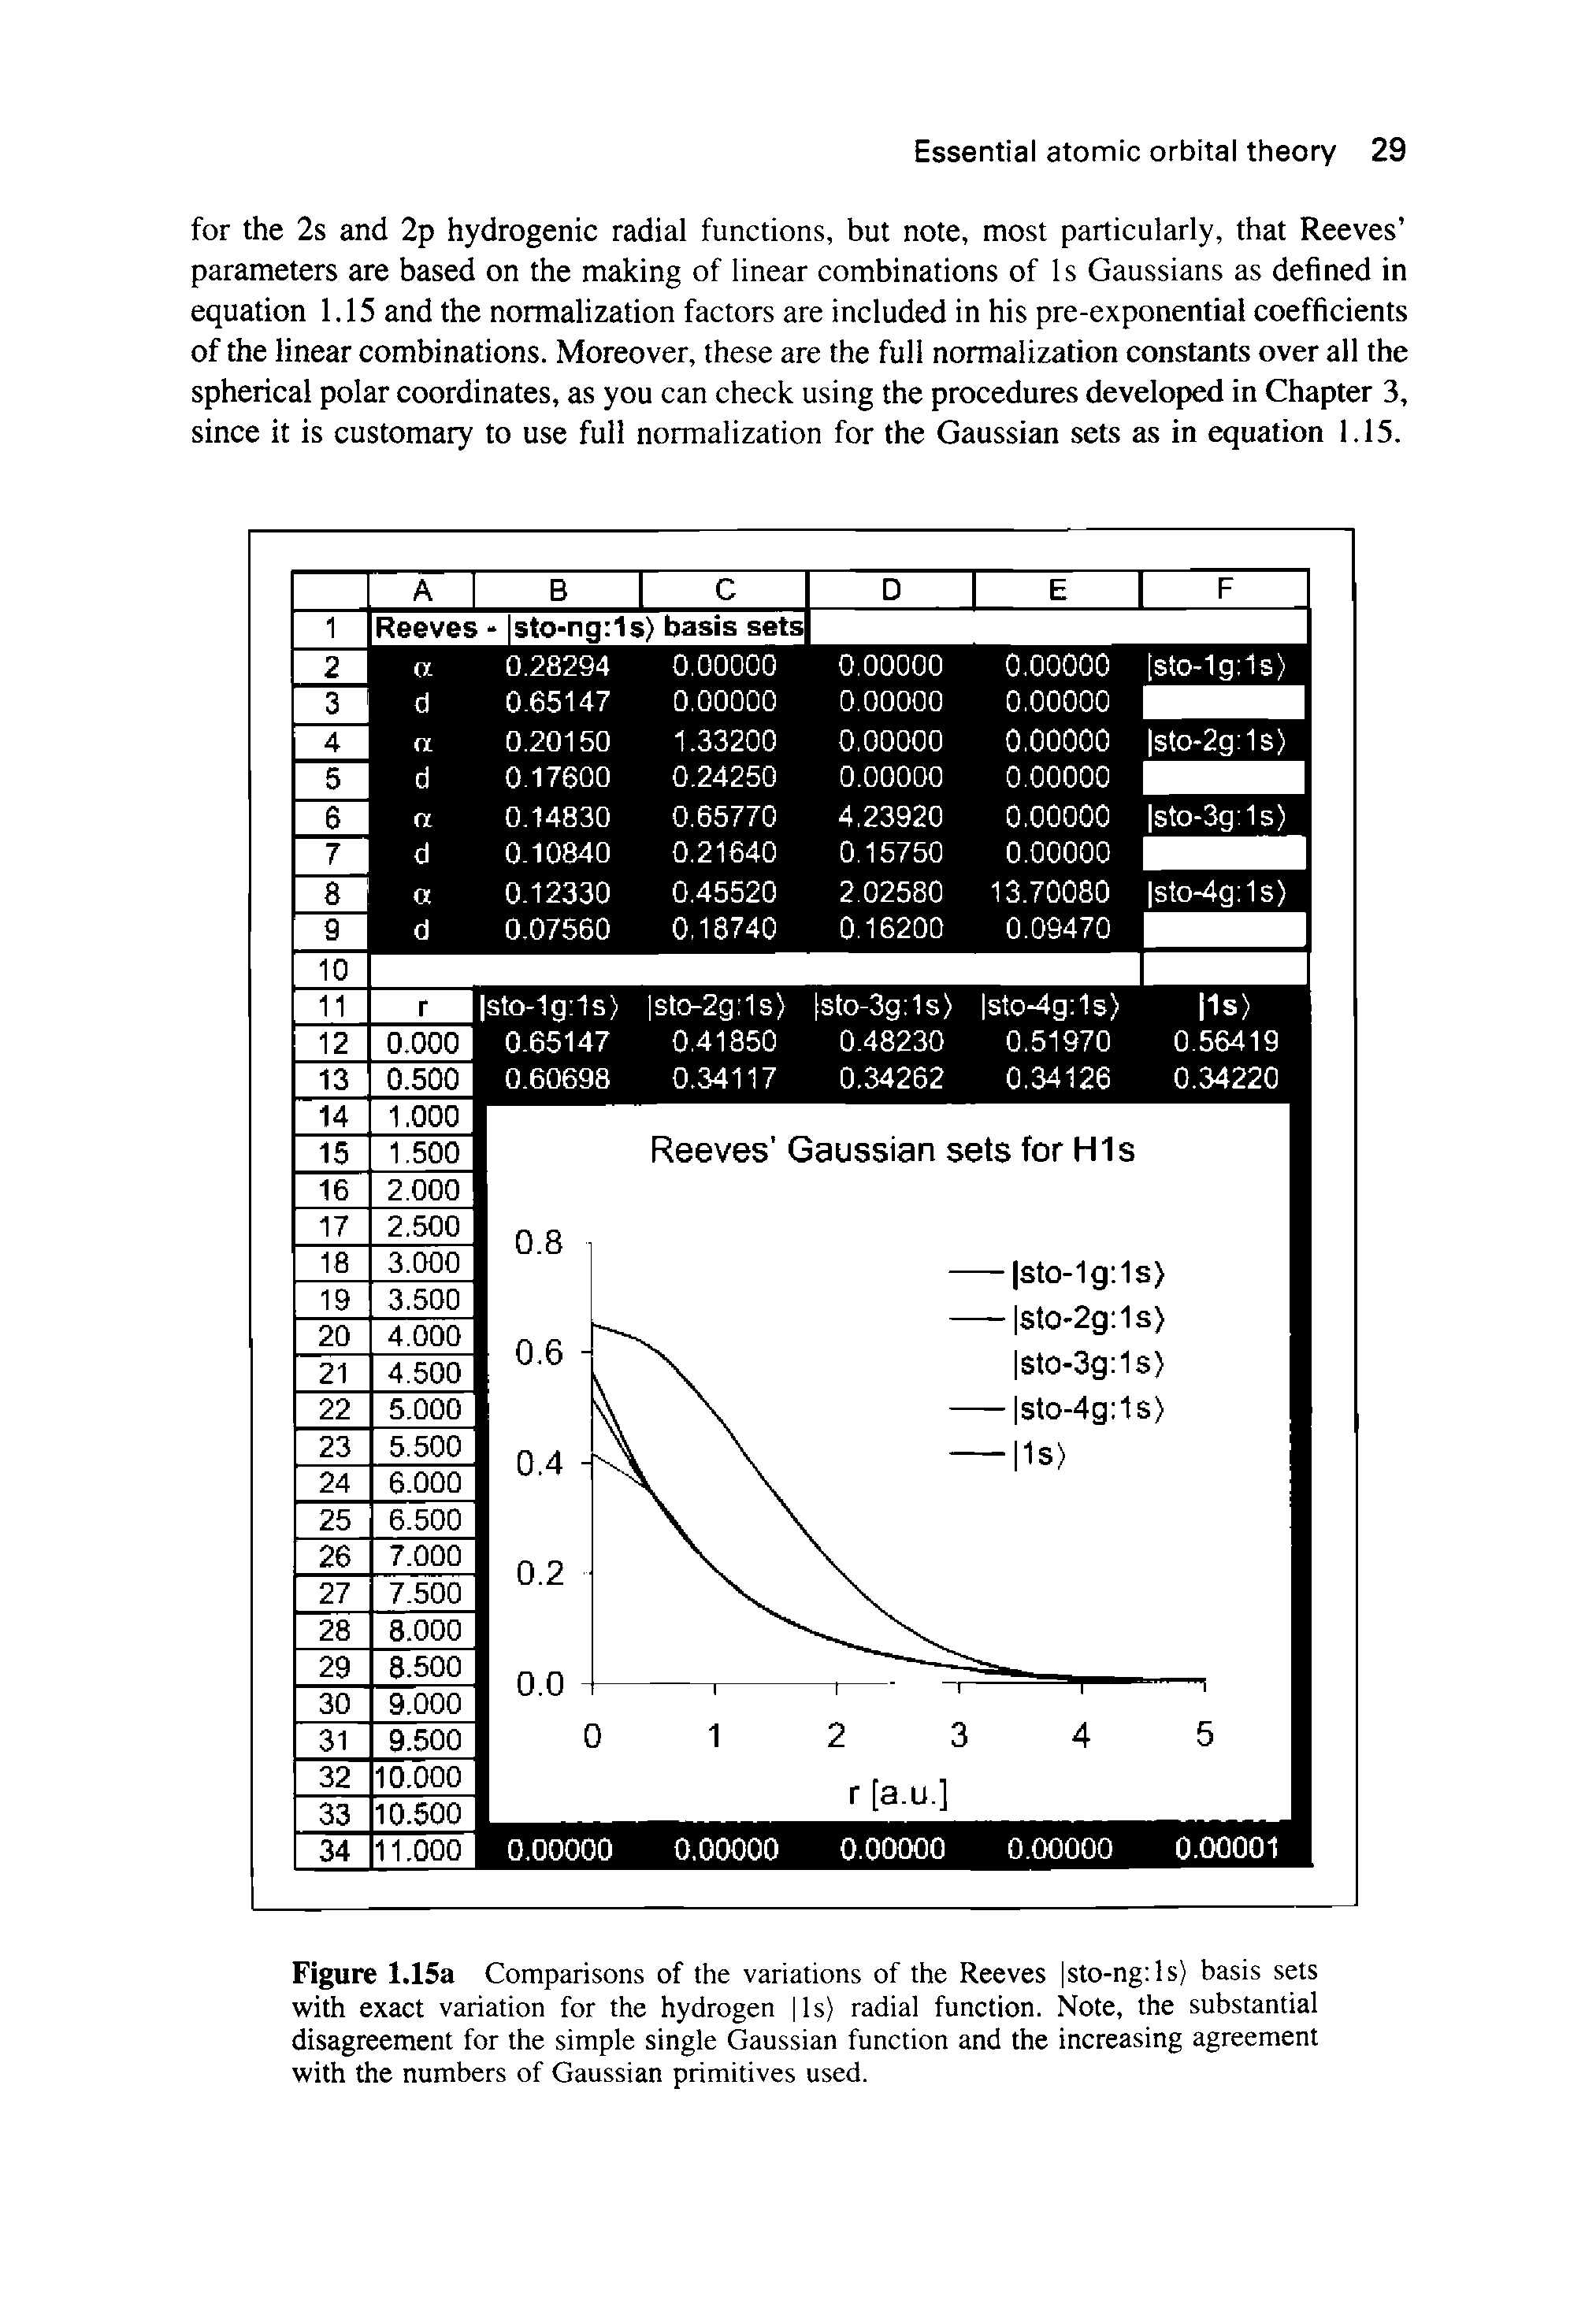 Figure 1.15a Comparisons of the variations of the Reeves sto-ng ls) basis sets with exact variation for the hydrogen ls) radial function. Note, the substantial disagreement for the simple single Gaussian function and the increasing agreement with the numbers of Gaussian primitives used.